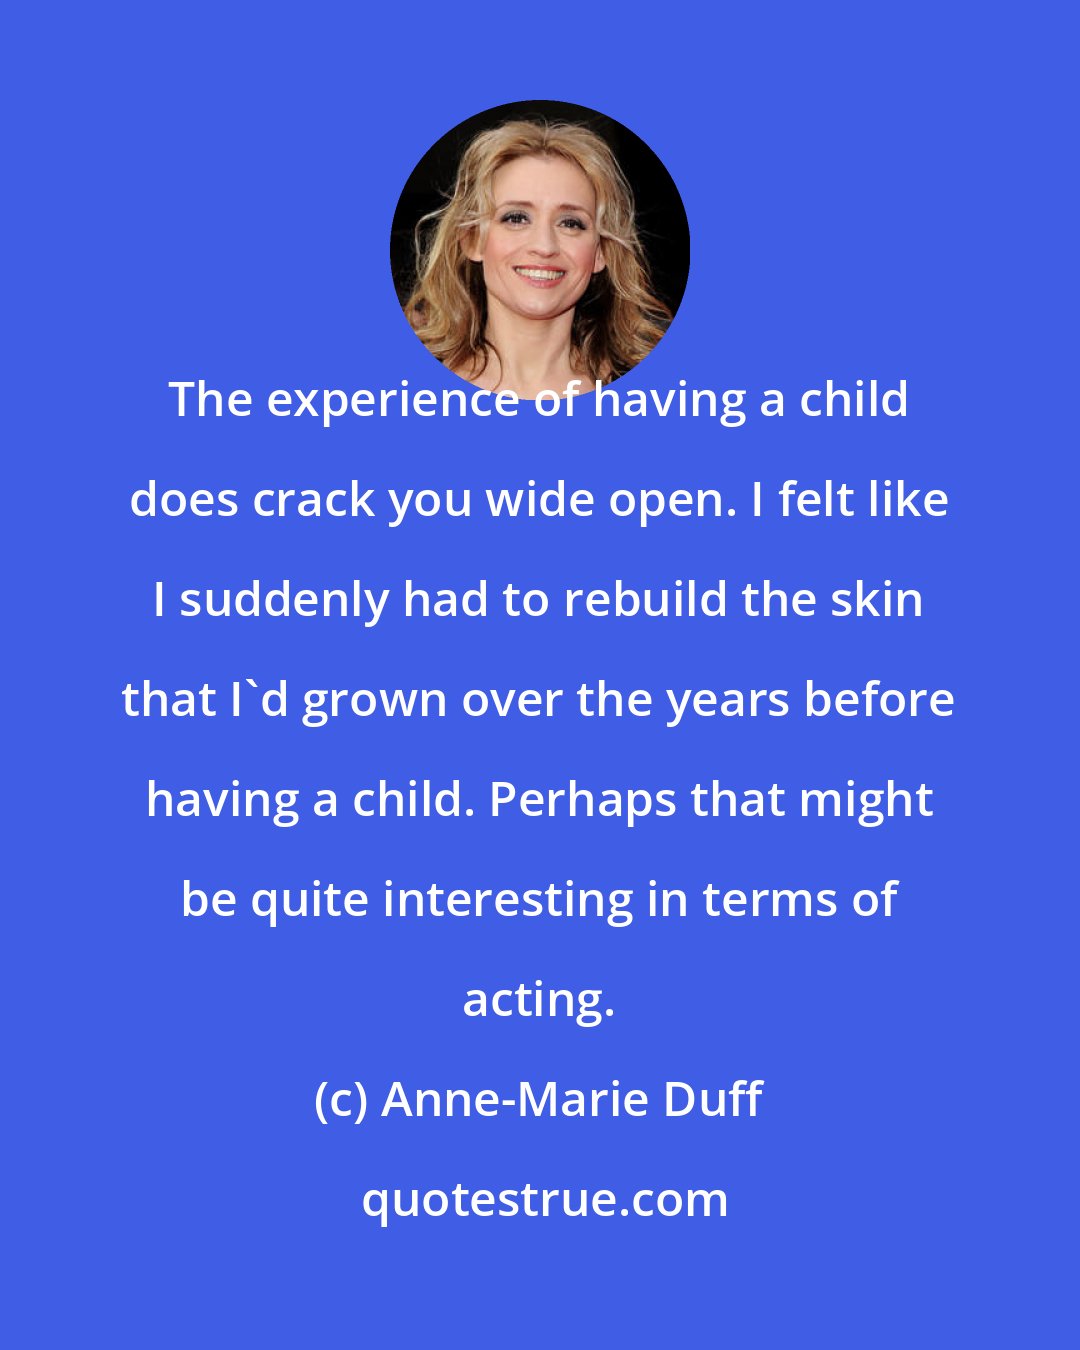 Anne-Marie Duff: The experience of having a child does crack you wide open. I felt like I suddenly had to rebuild the skin that I'd grown over the years before having a child. Perhaps that might be quite interesting in terms of acting.